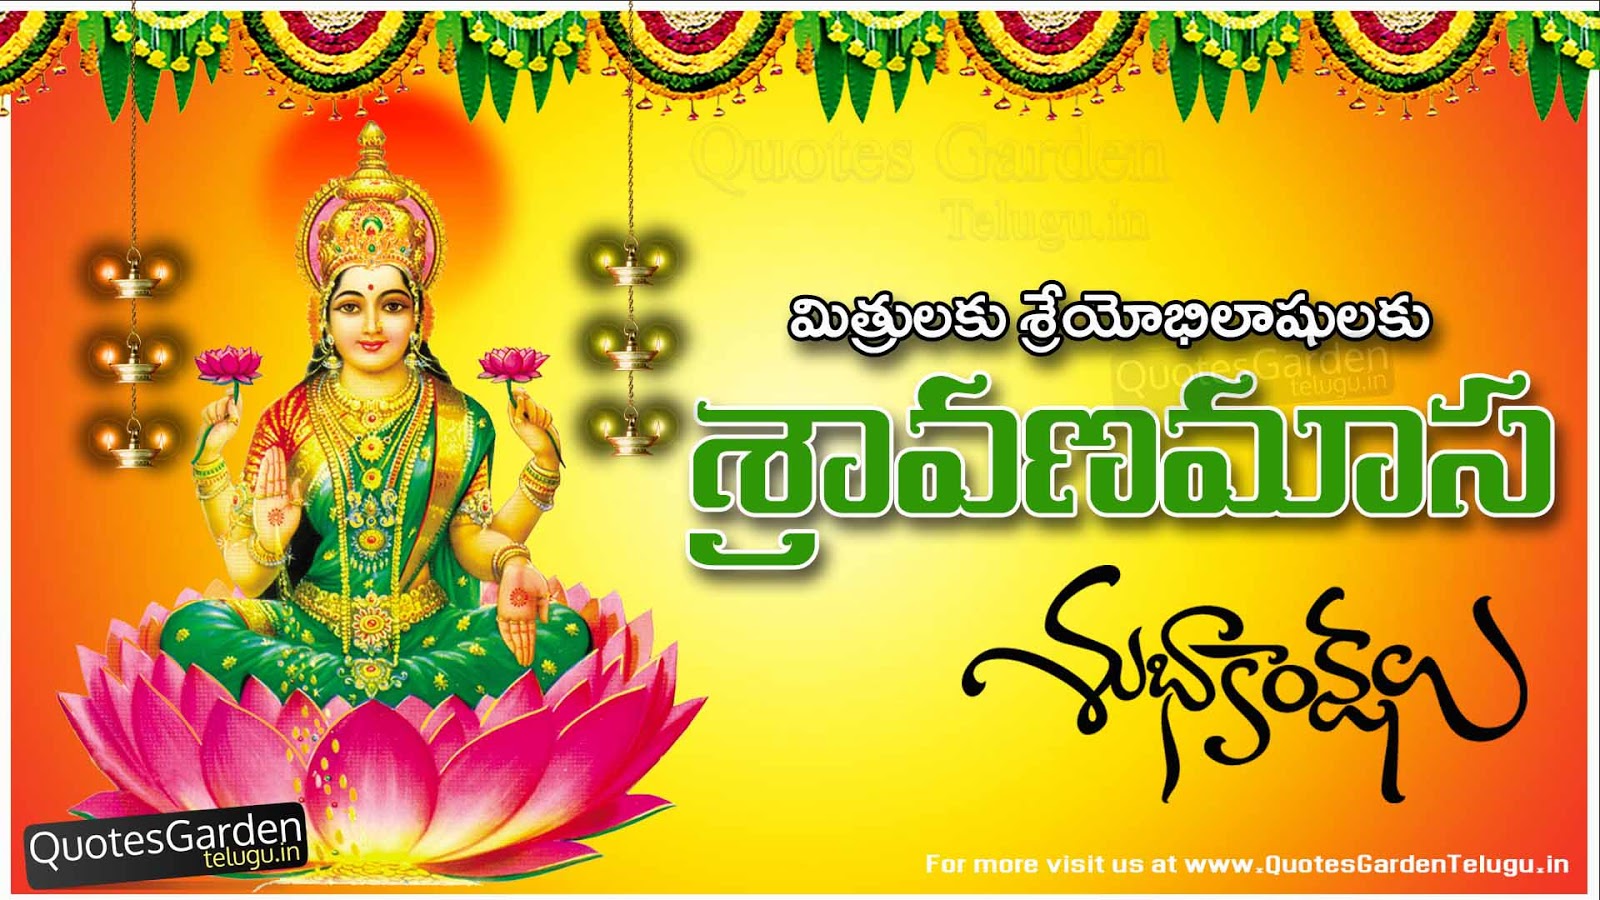 Sravana masam festival Greetings wallpapers information | QUOTES ...